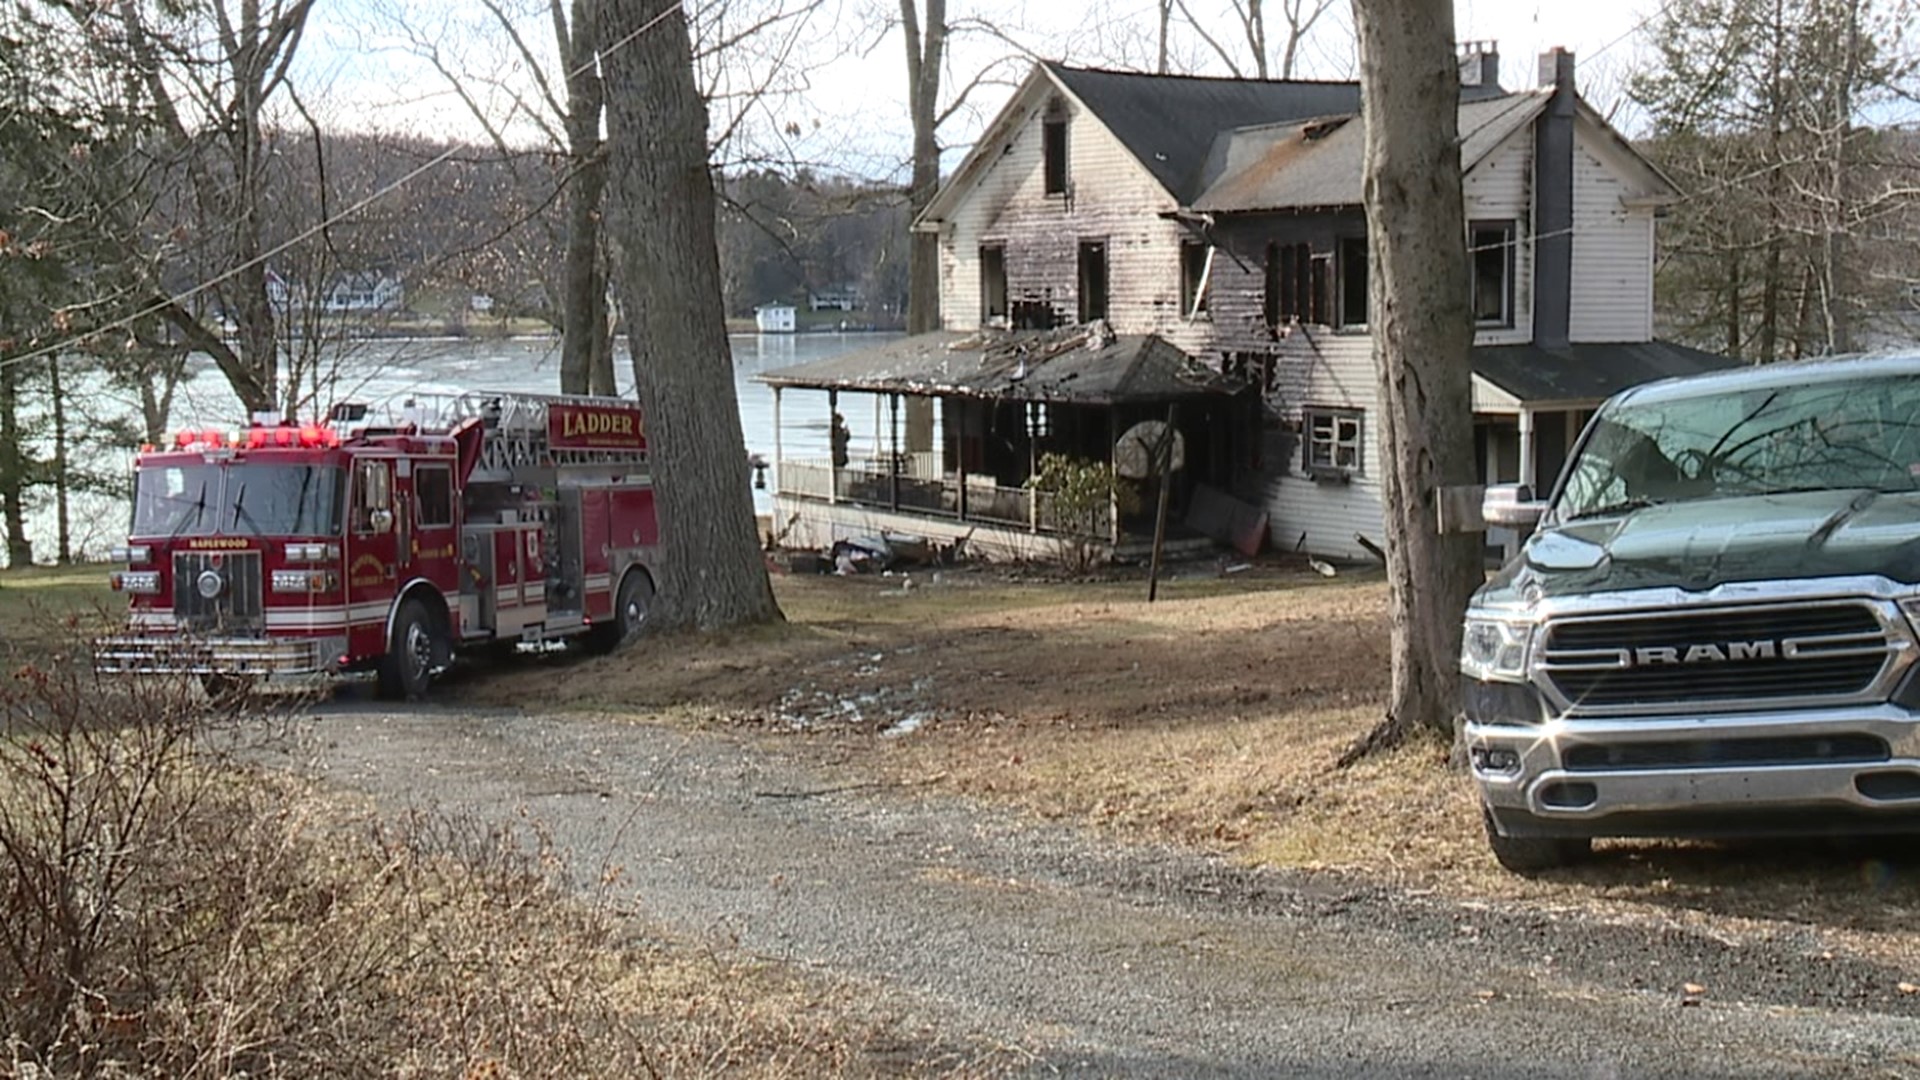 Flames broke out around noon Sunday at the home along East Shore Drive in Lake Ariel.